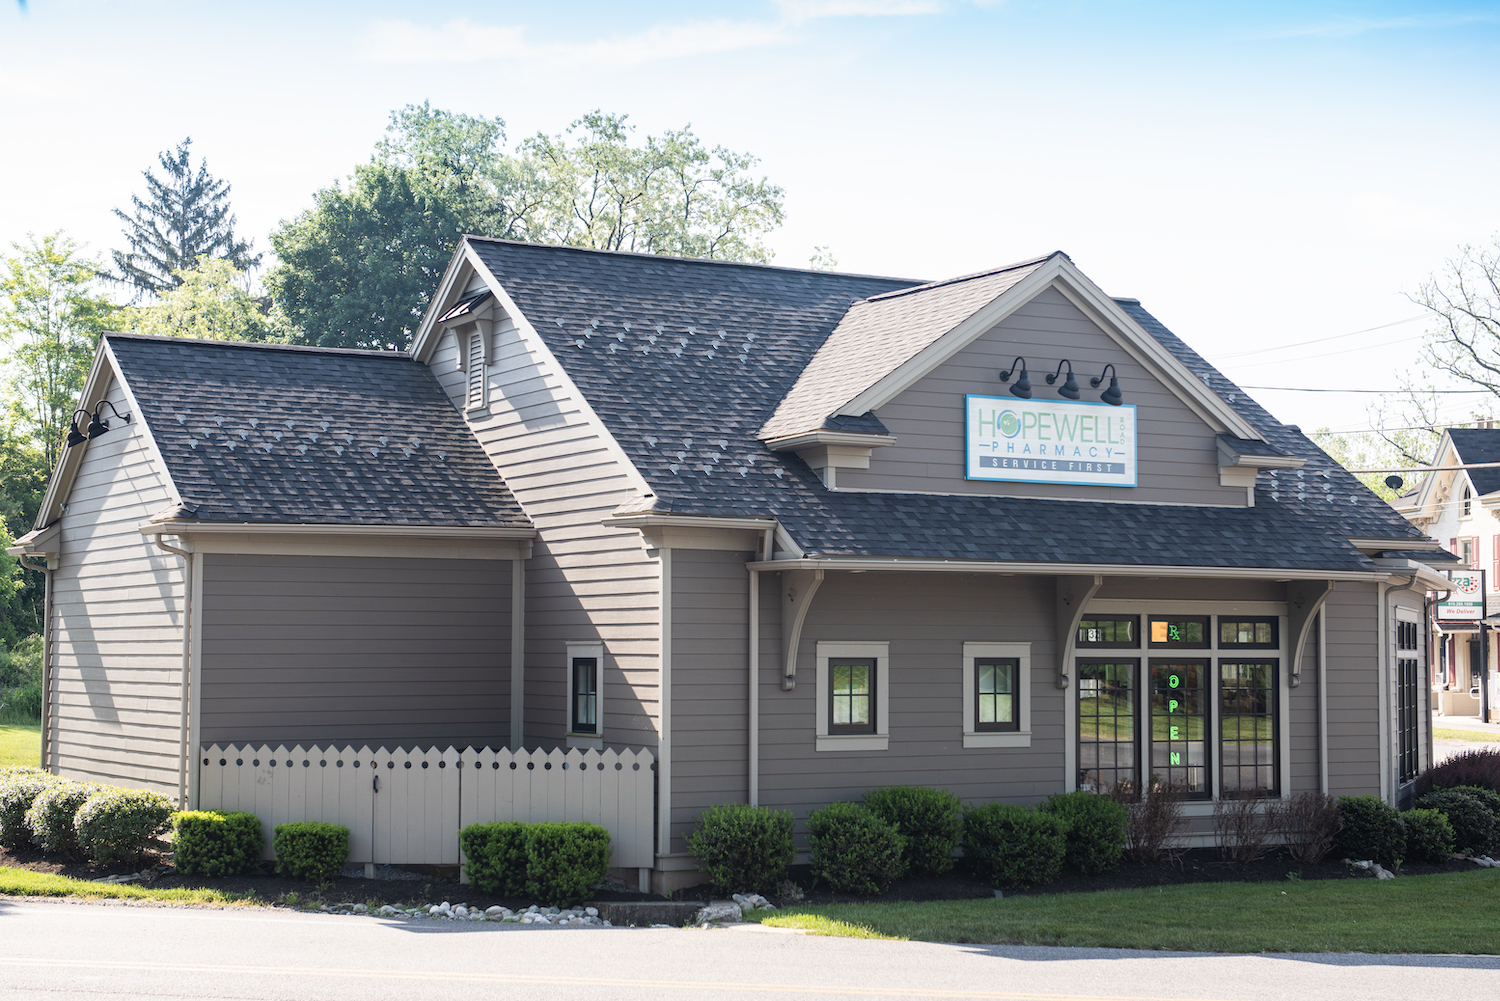 Front of Home Style Commercial Building for Hopewell Pharmacy